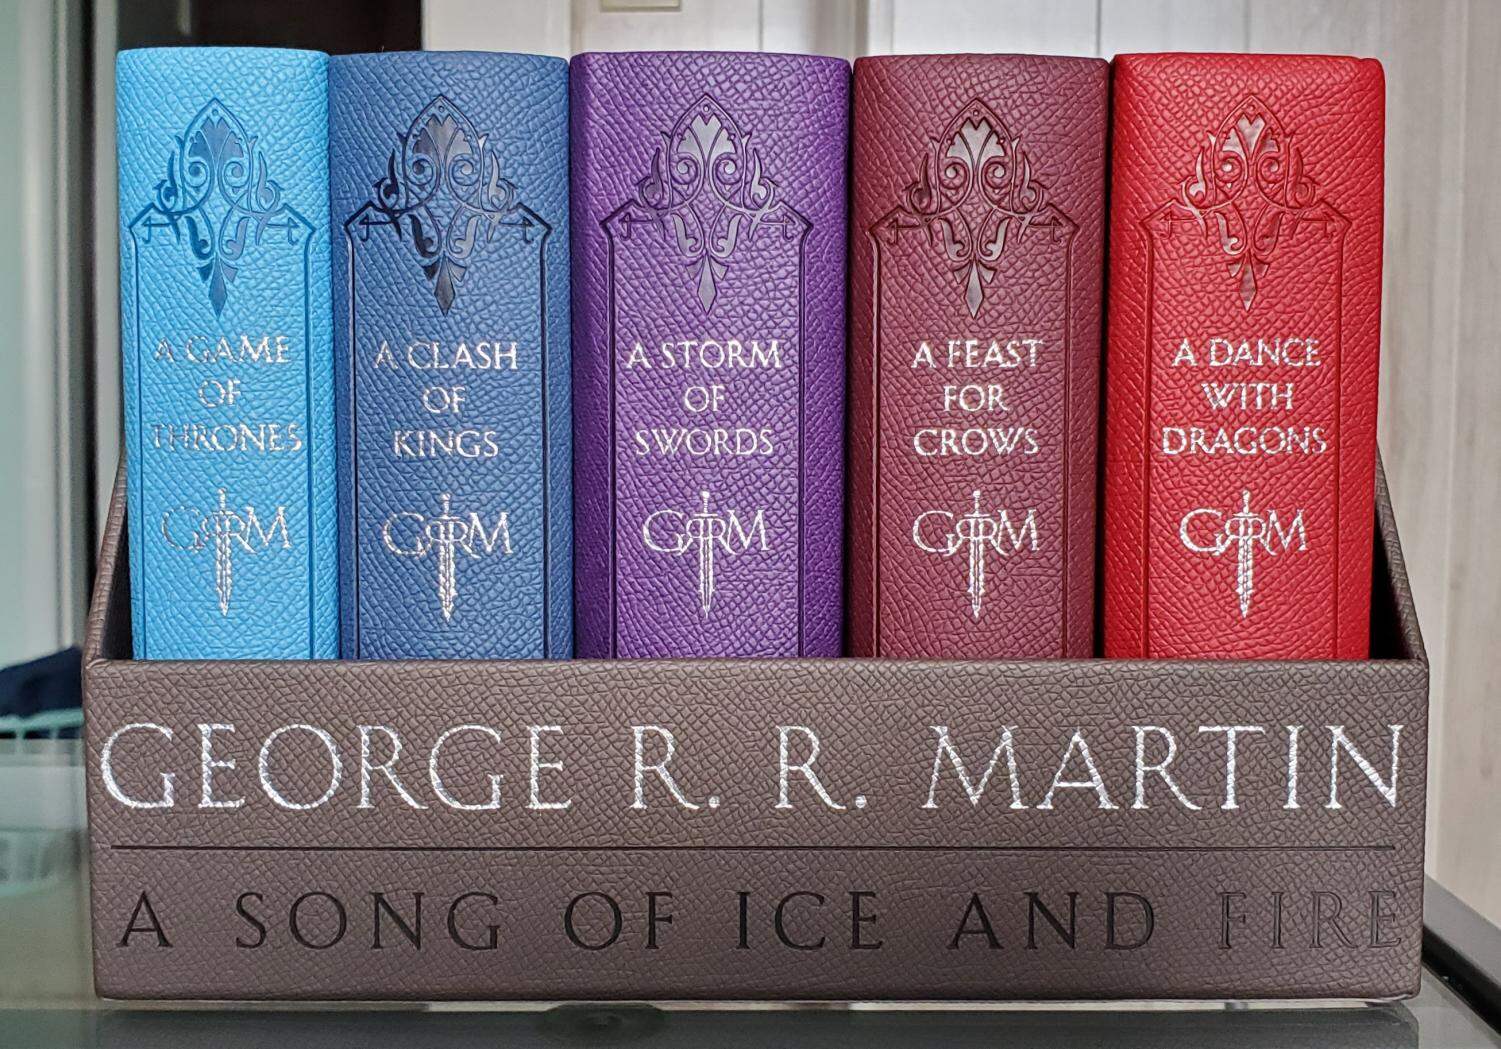 15-a-song-of-ice-and-fire-facts